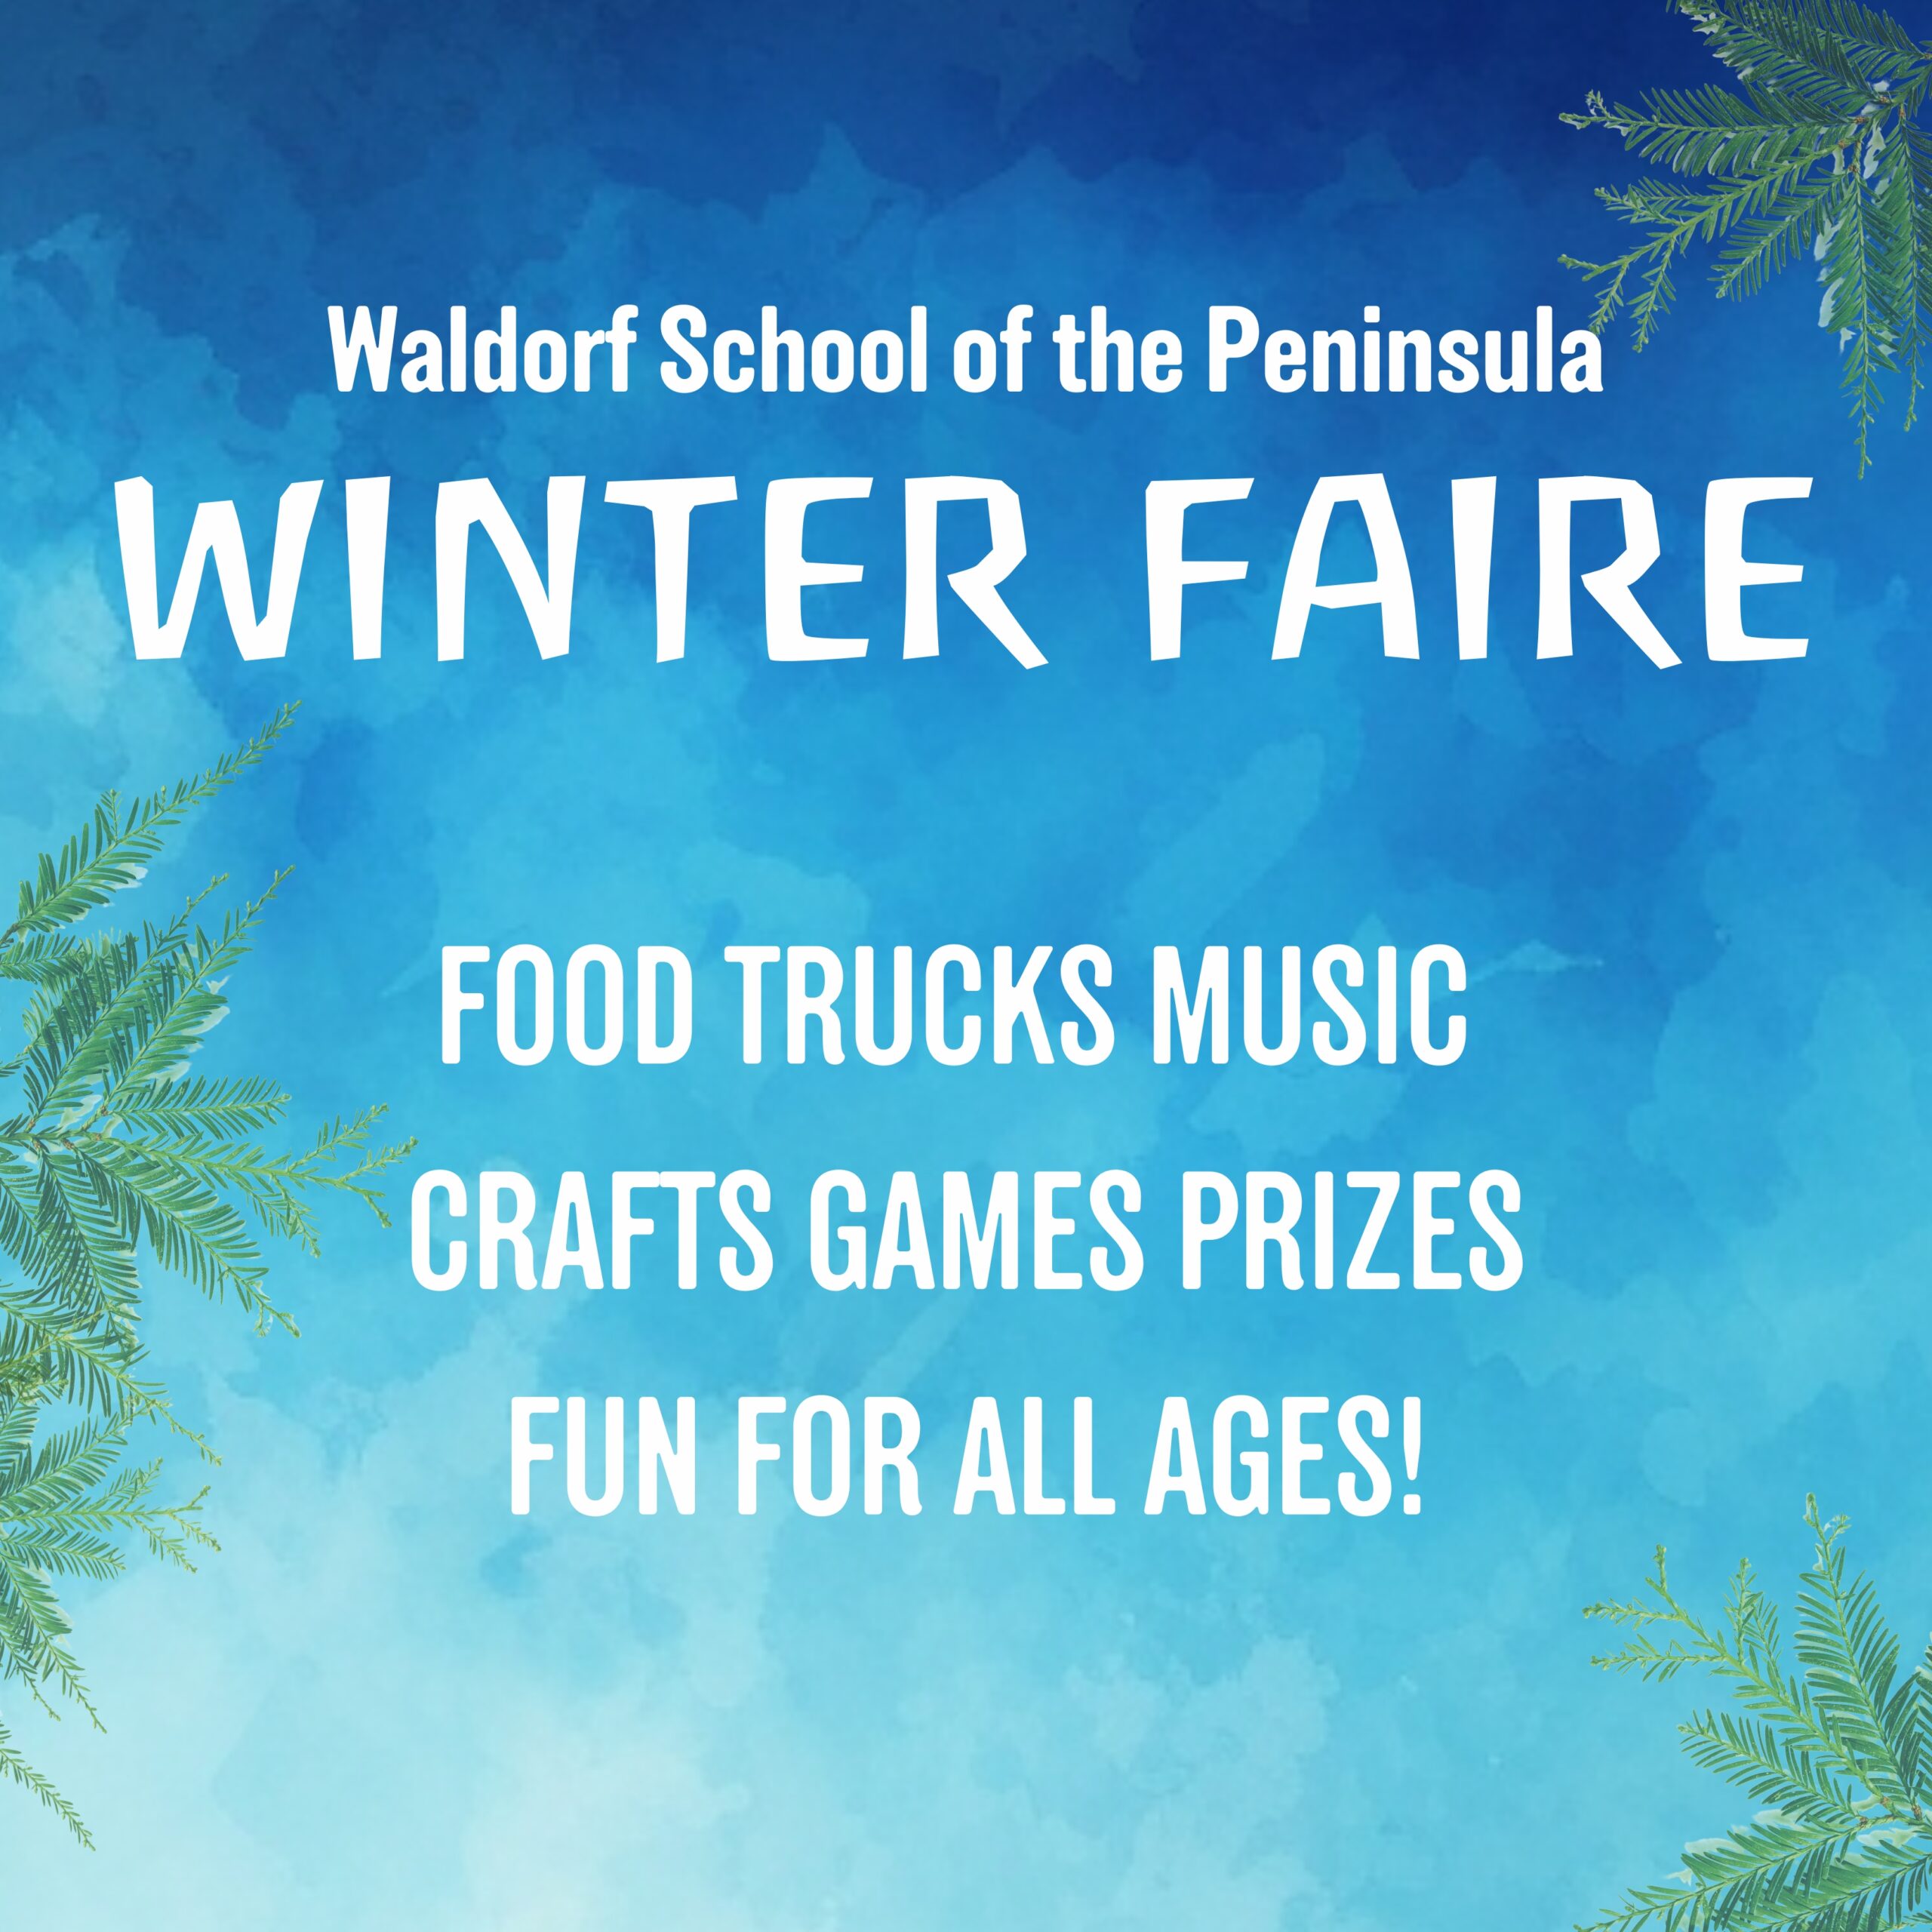 Winter Faire<br />
Food Trucks Music Crafts Games Prizes Fun for All Ages